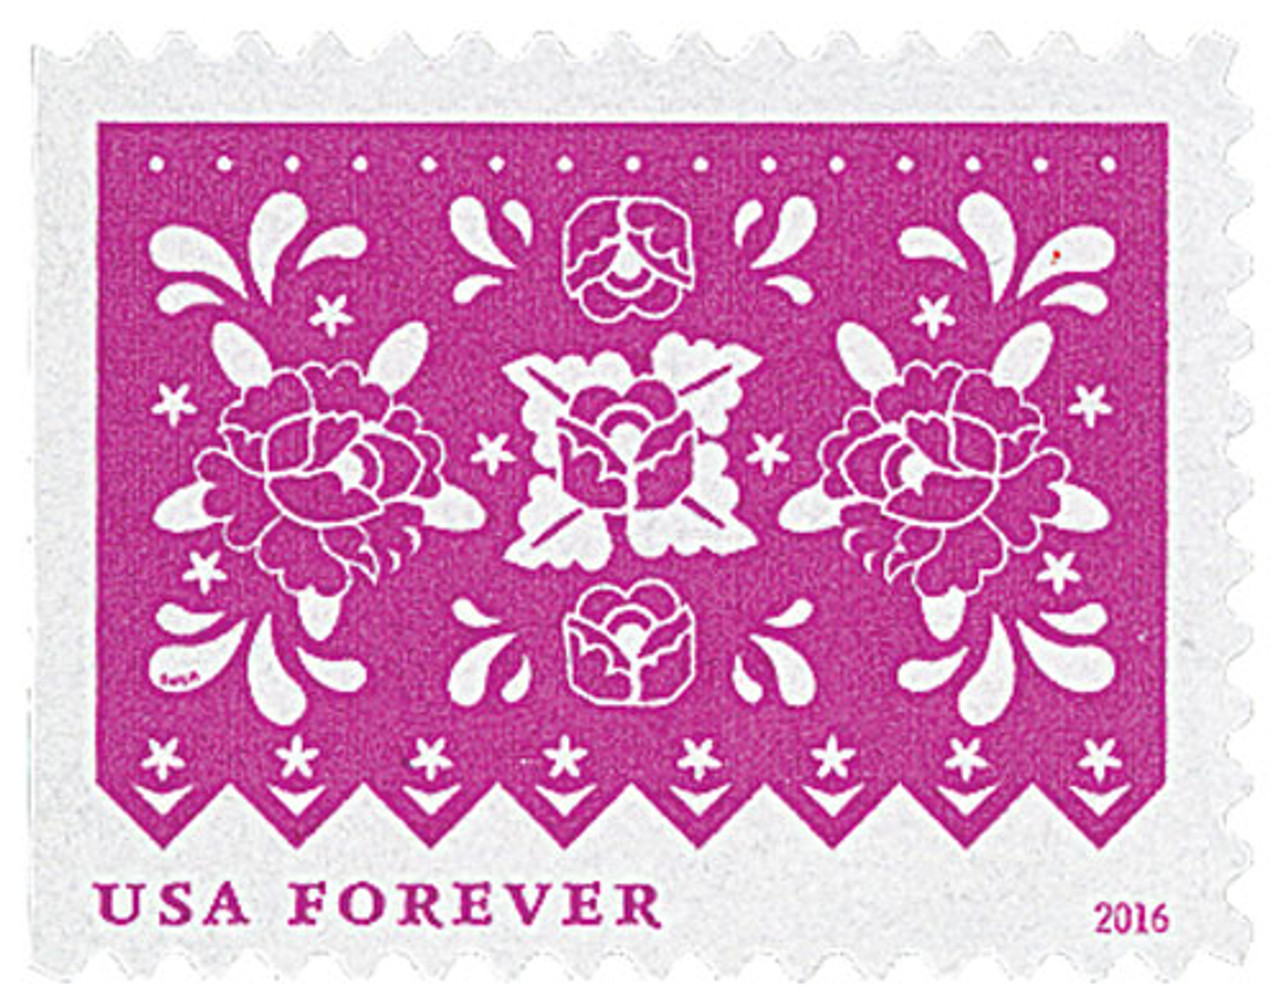 5635 - 2021 First-Class Forever Stamp - Happy Birthday - Mystic Stamp  Company